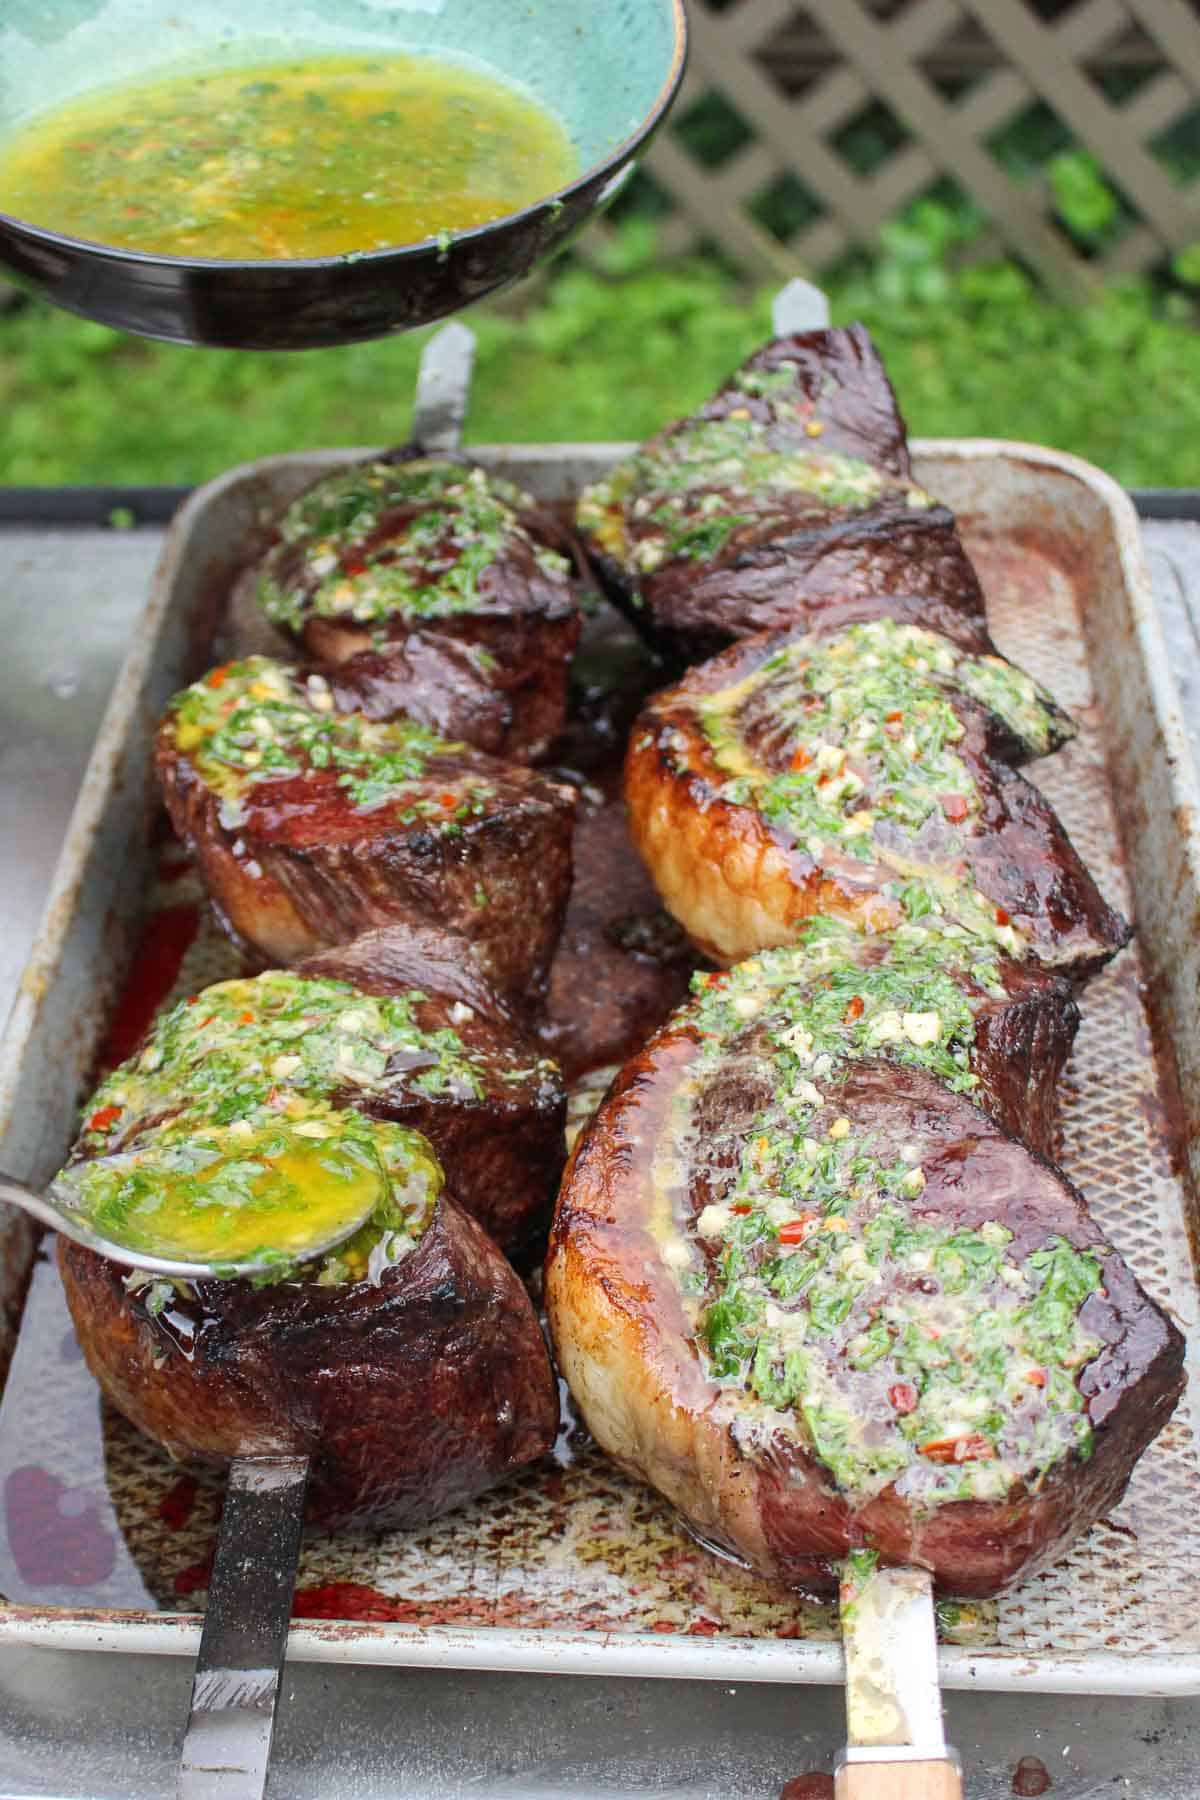 The chimichurri butter is slathered over the picanha steaks after resting. 